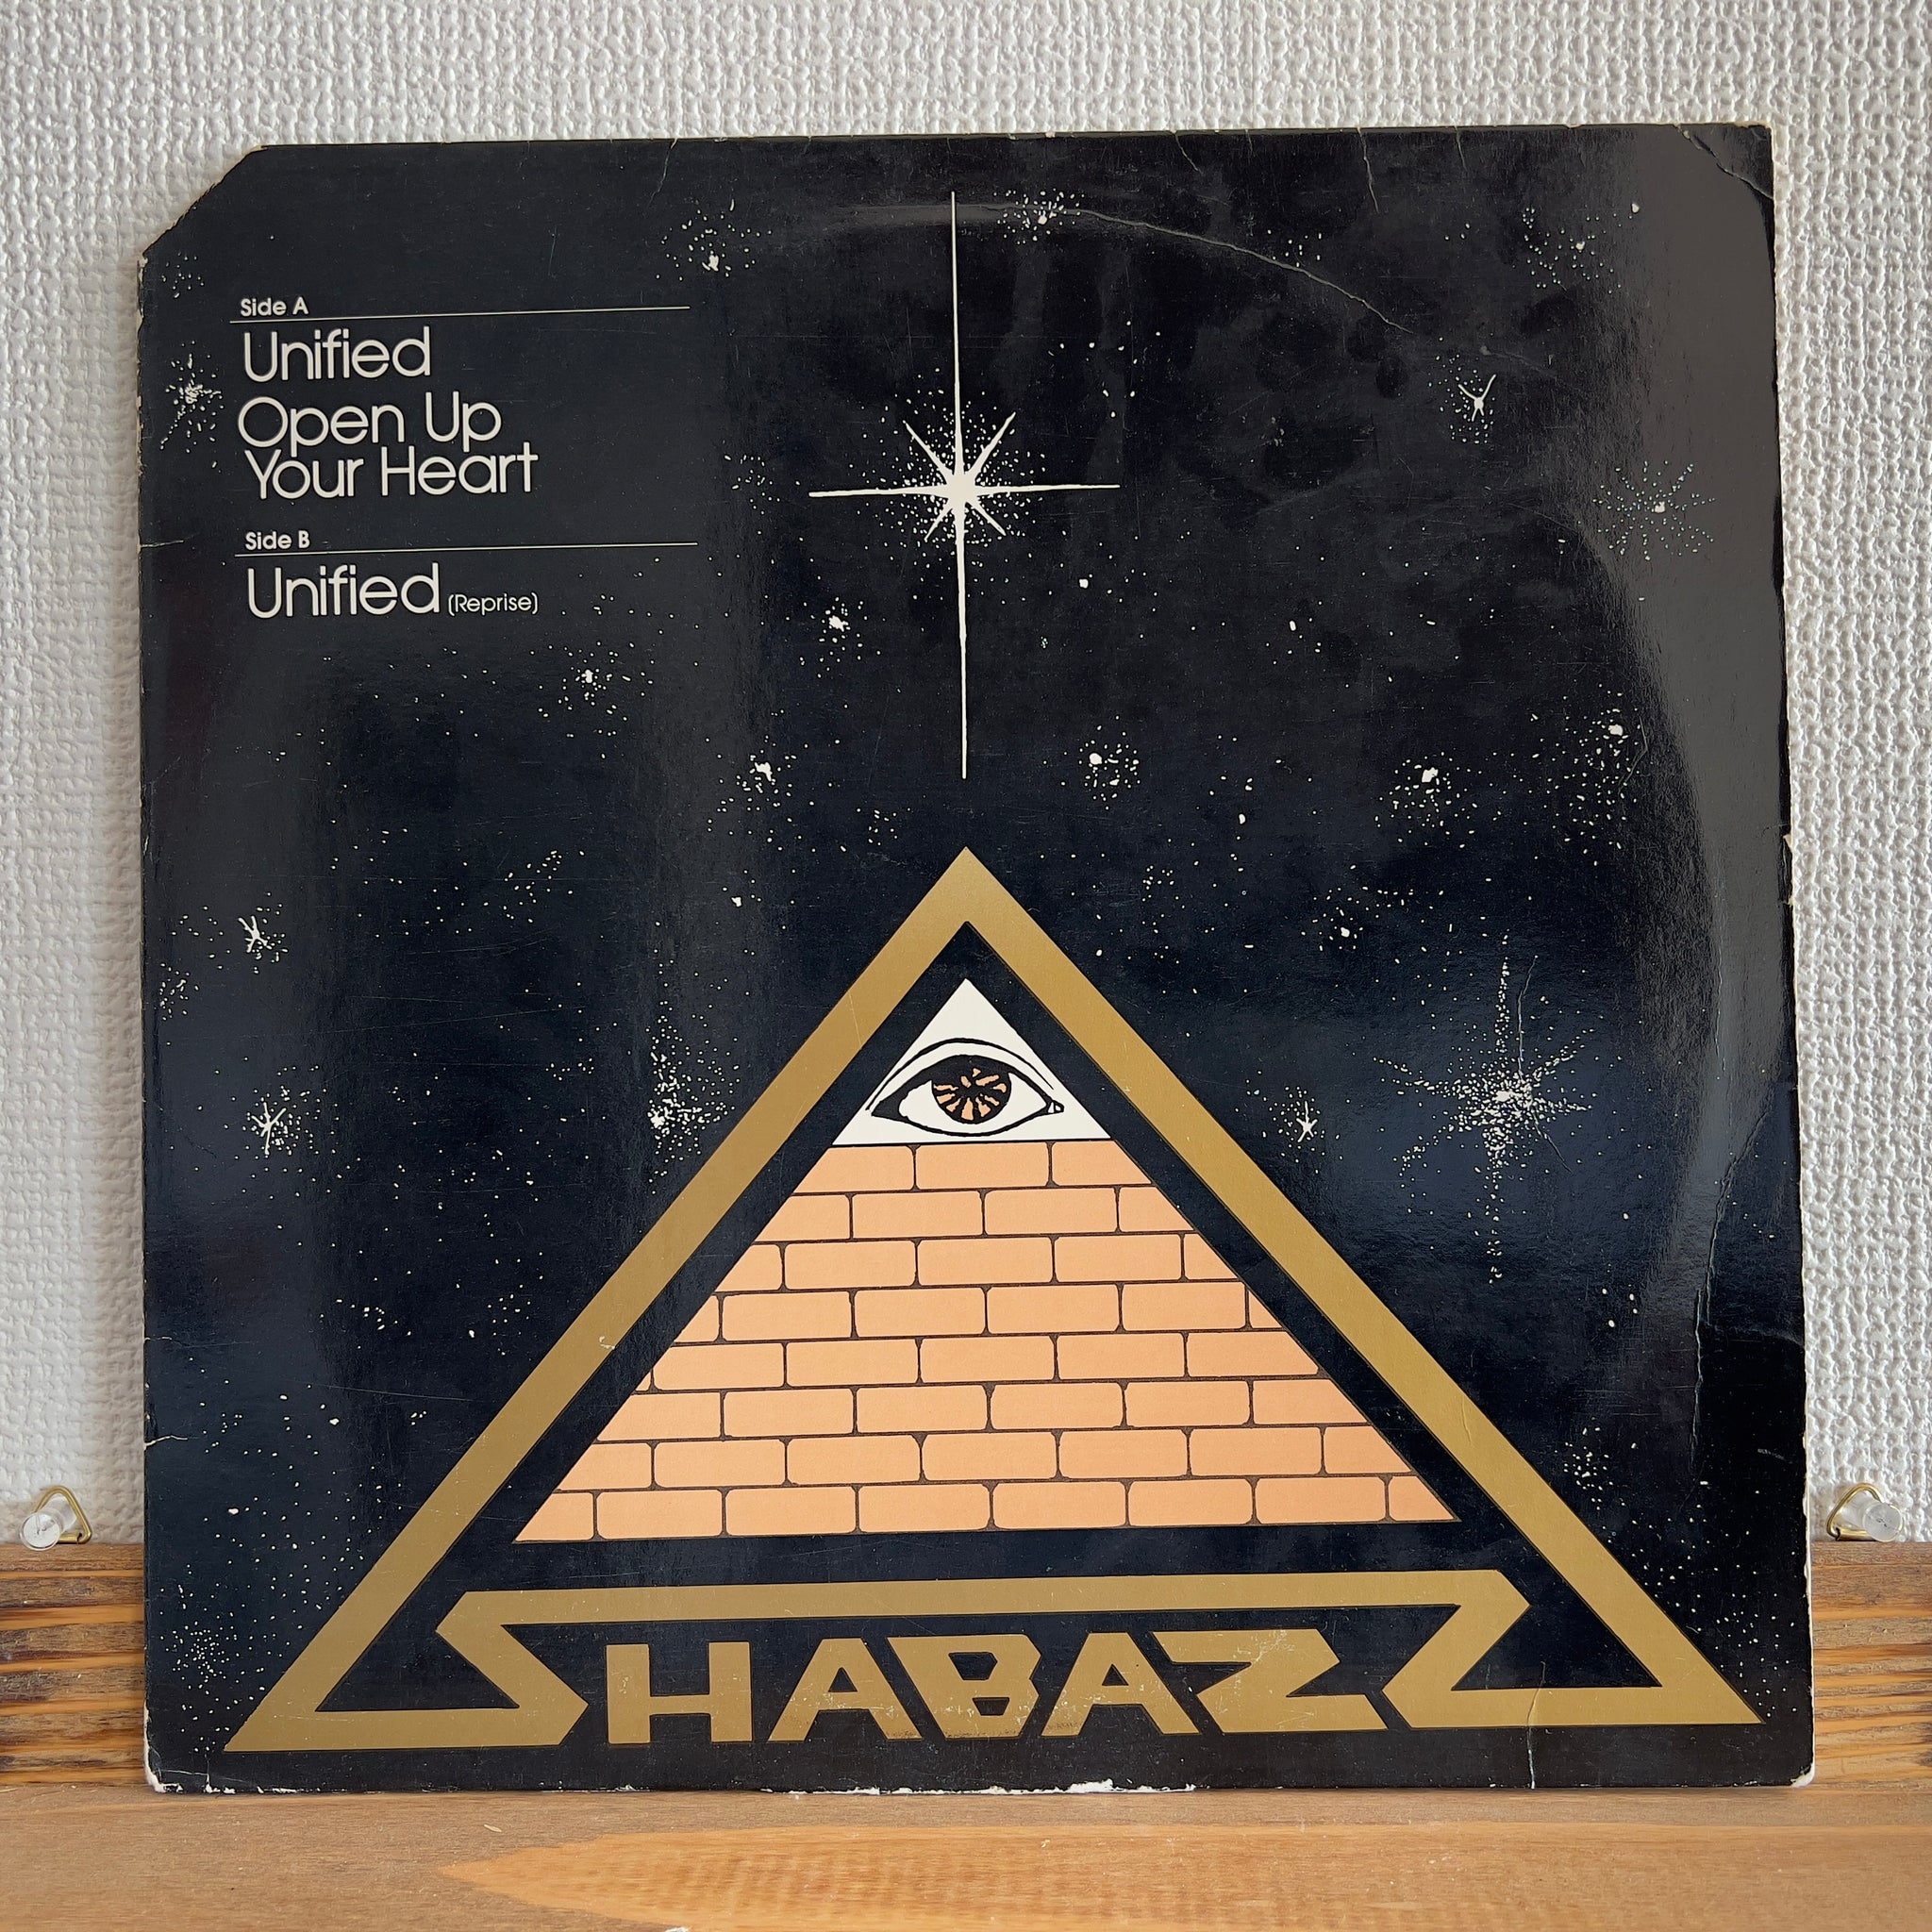 Shabazz - Unified